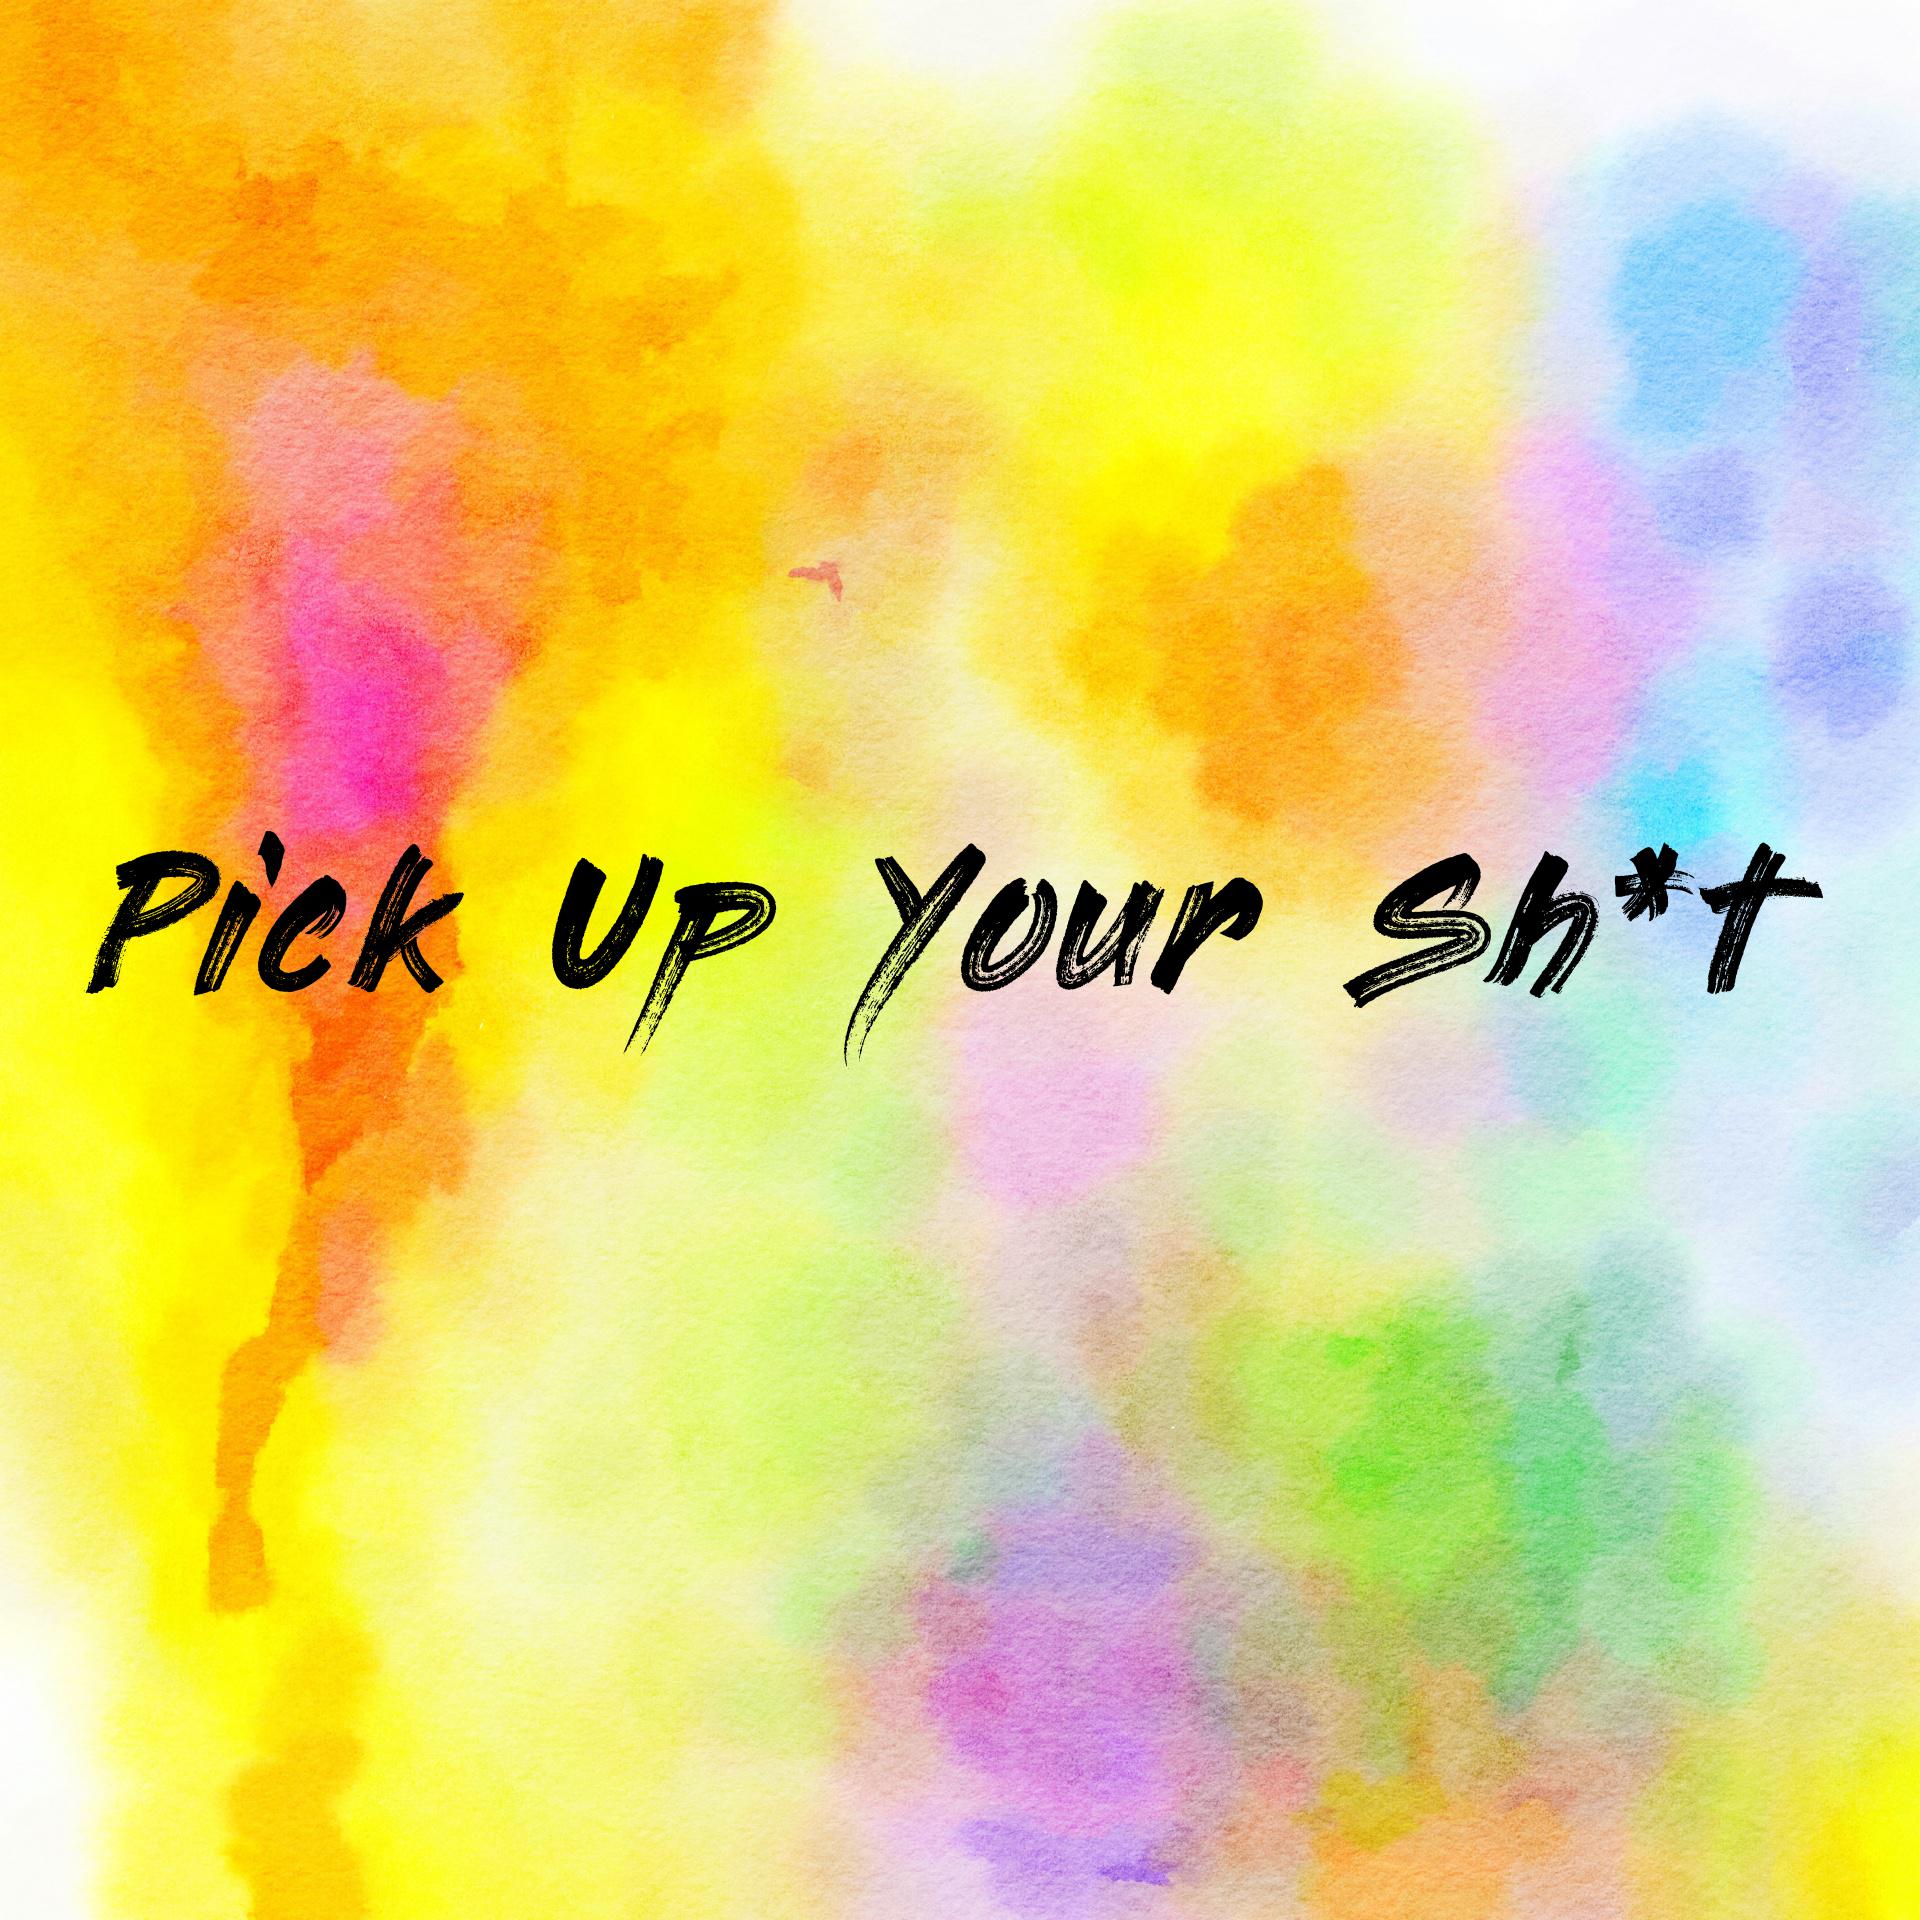 Pick Up Your Sh*t